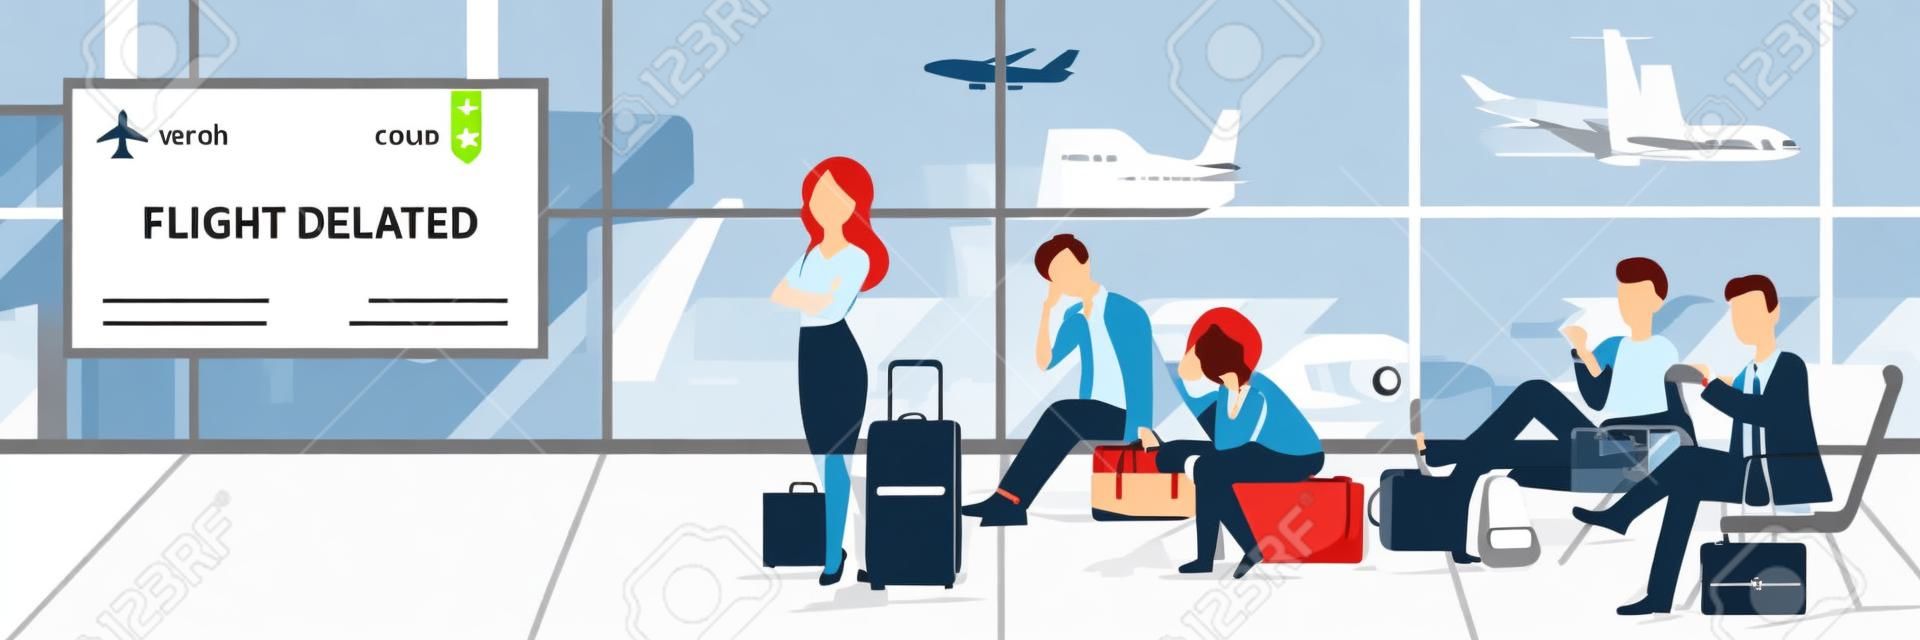 Flight delay or cancel concept. Vector flat cartoon illustration. Tired and upset passengers with luggage waiting for departure at airport terminal